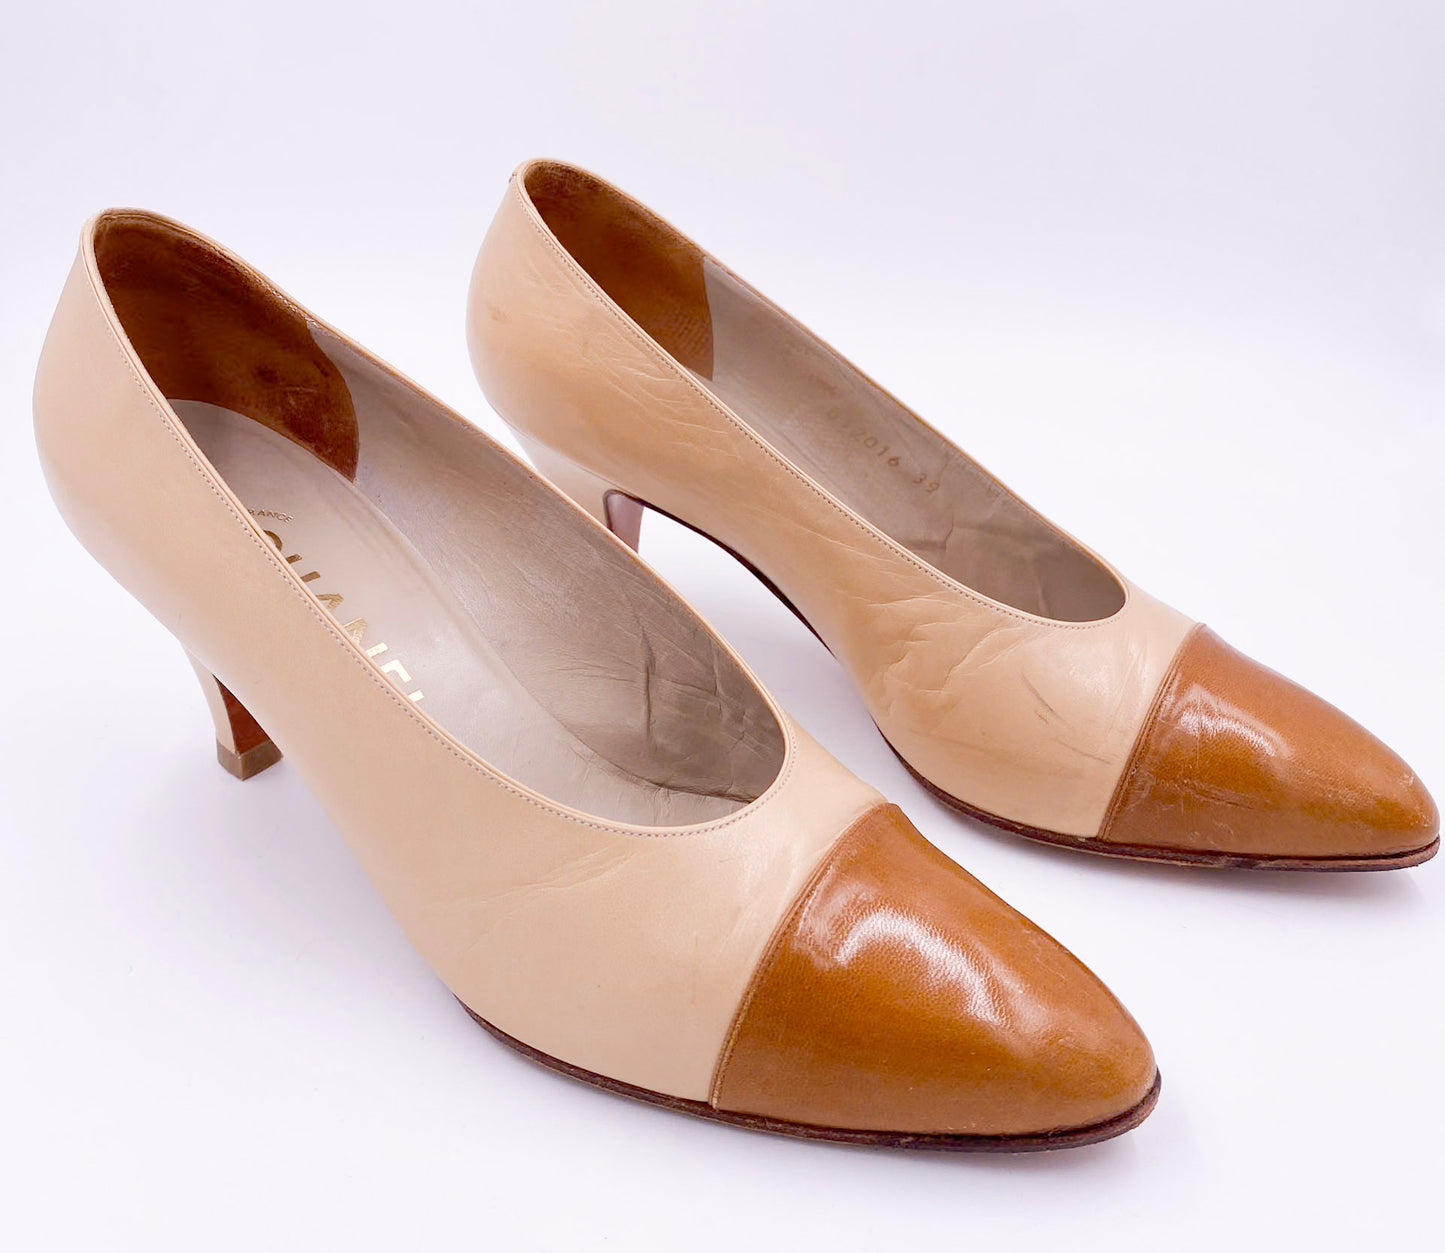 Chanel Pumps Beige With Brown Leather Toe